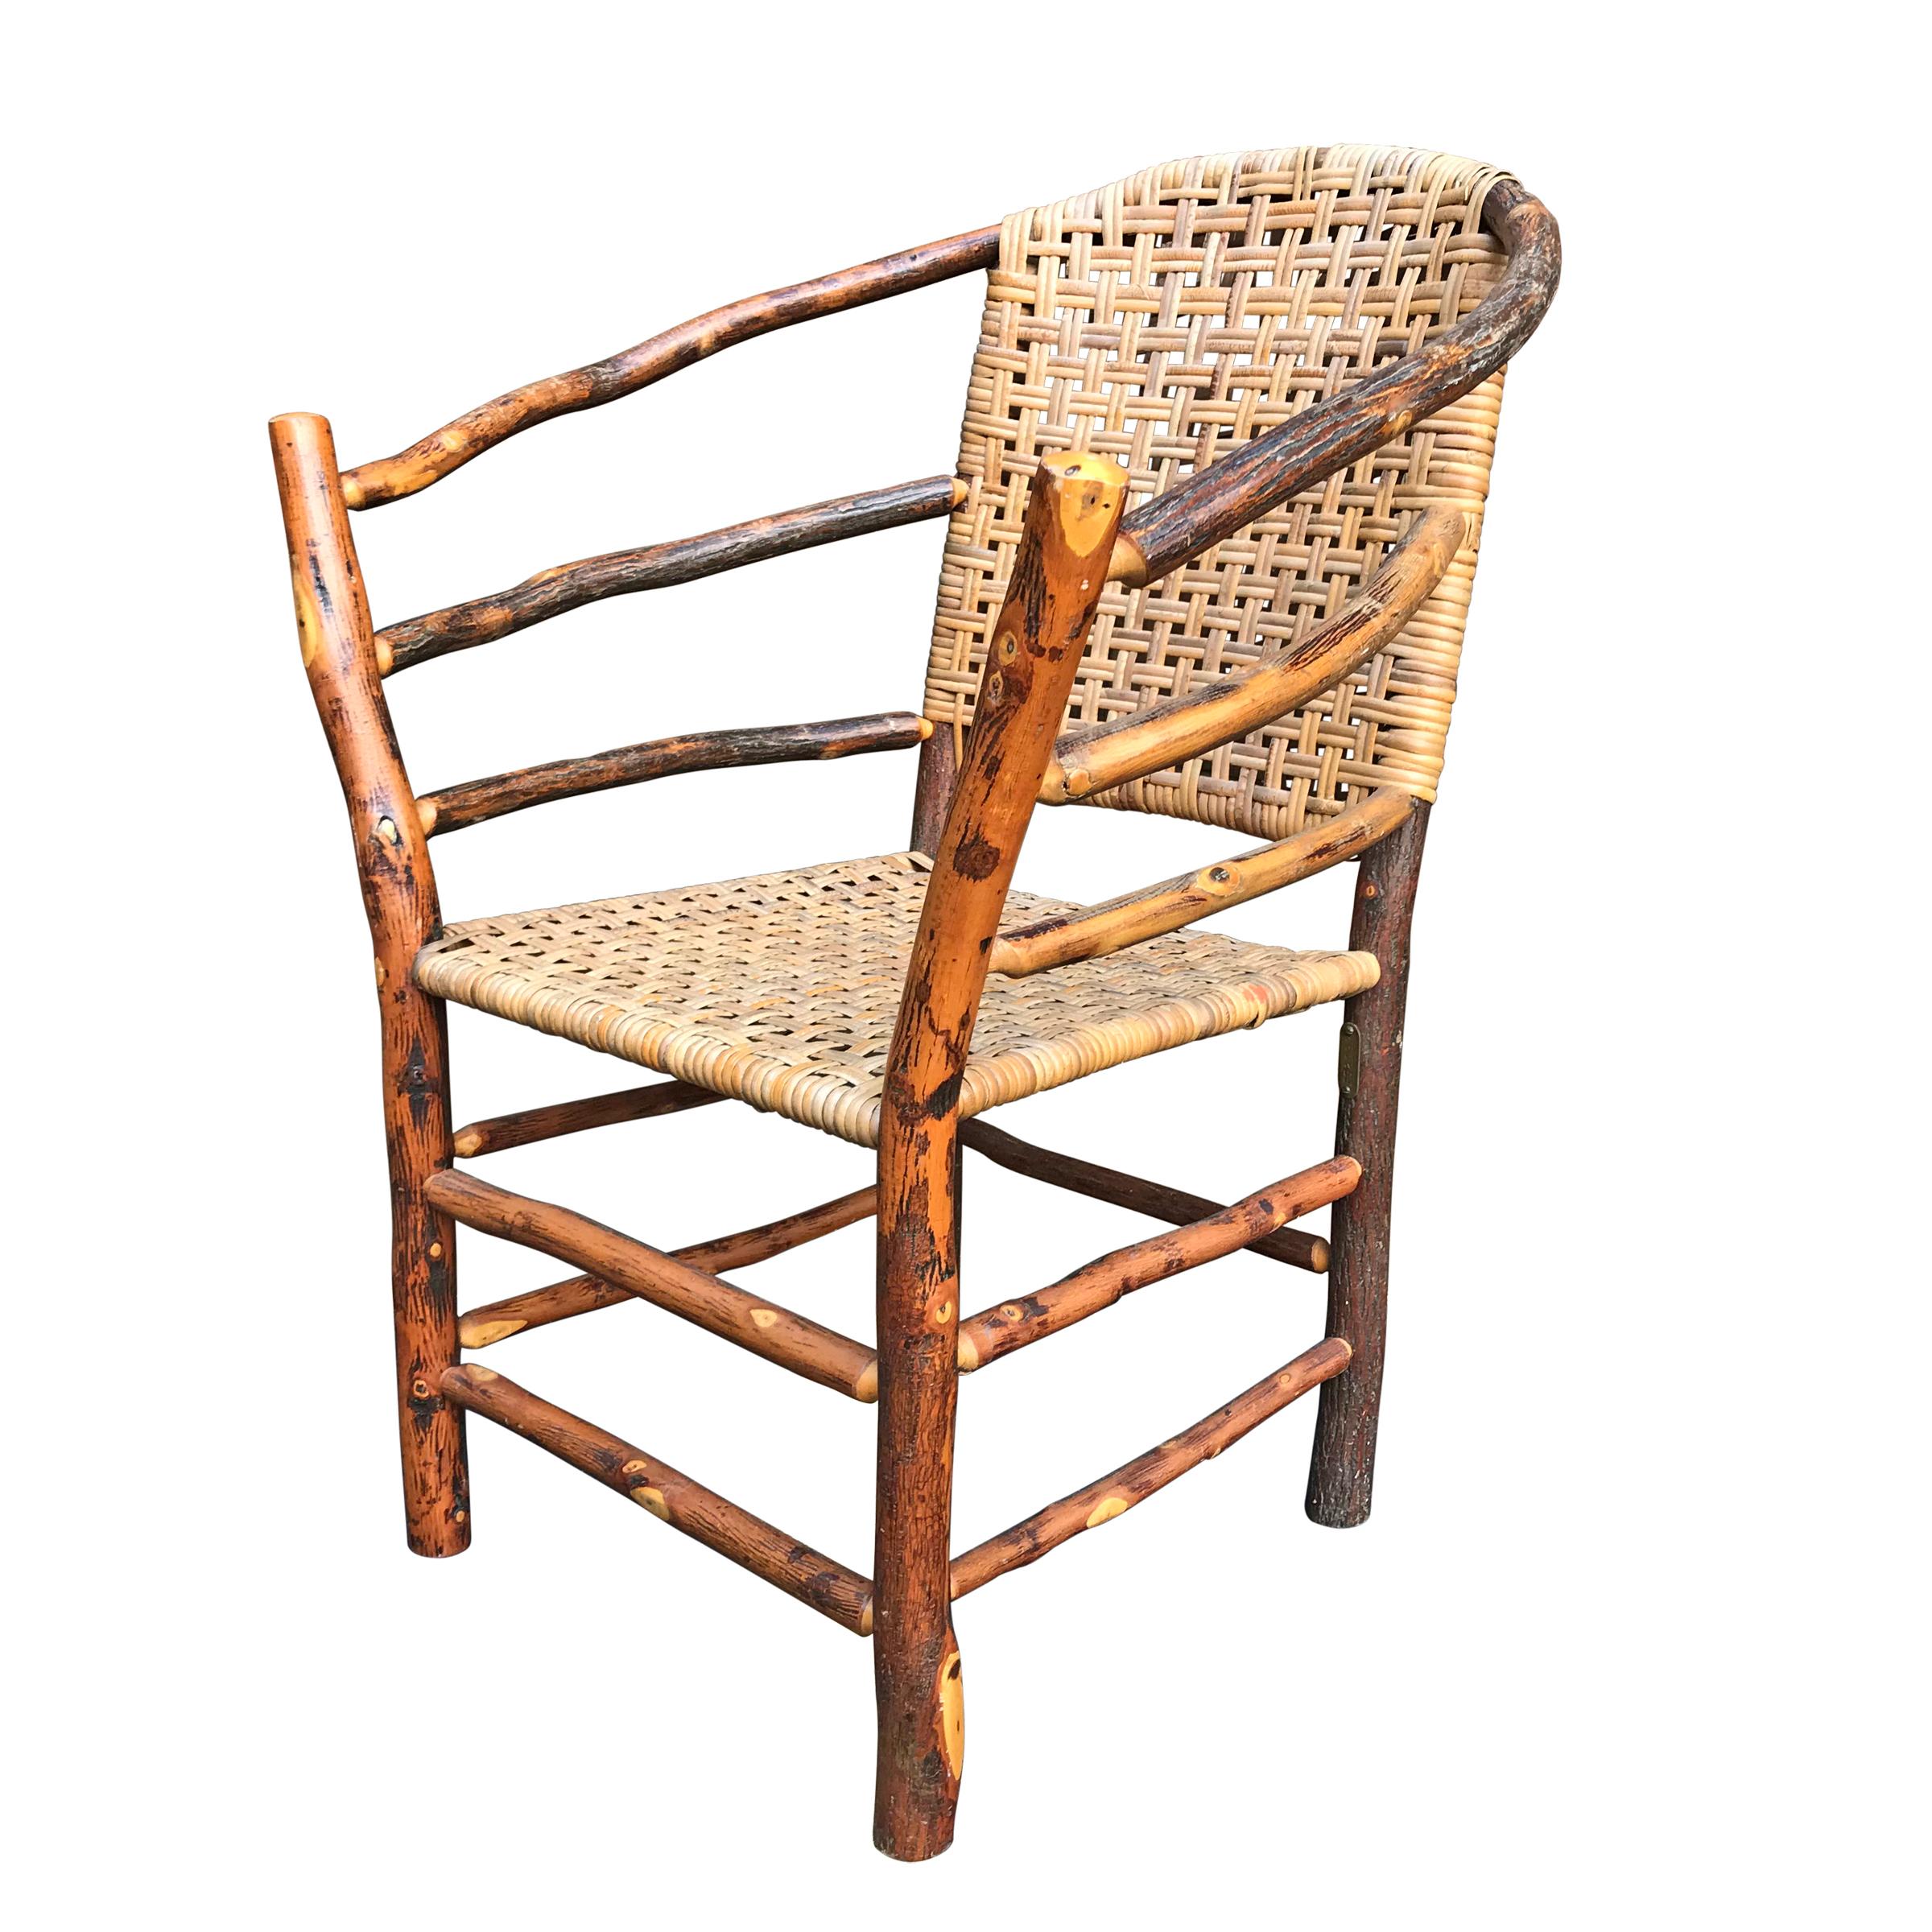 An early 20th century Old Hickory barrel-back armchair constructed of bent hickory sapling arms, legs, and stretchers, and a seat and back of handwoven inner bark strips, also of hickory.